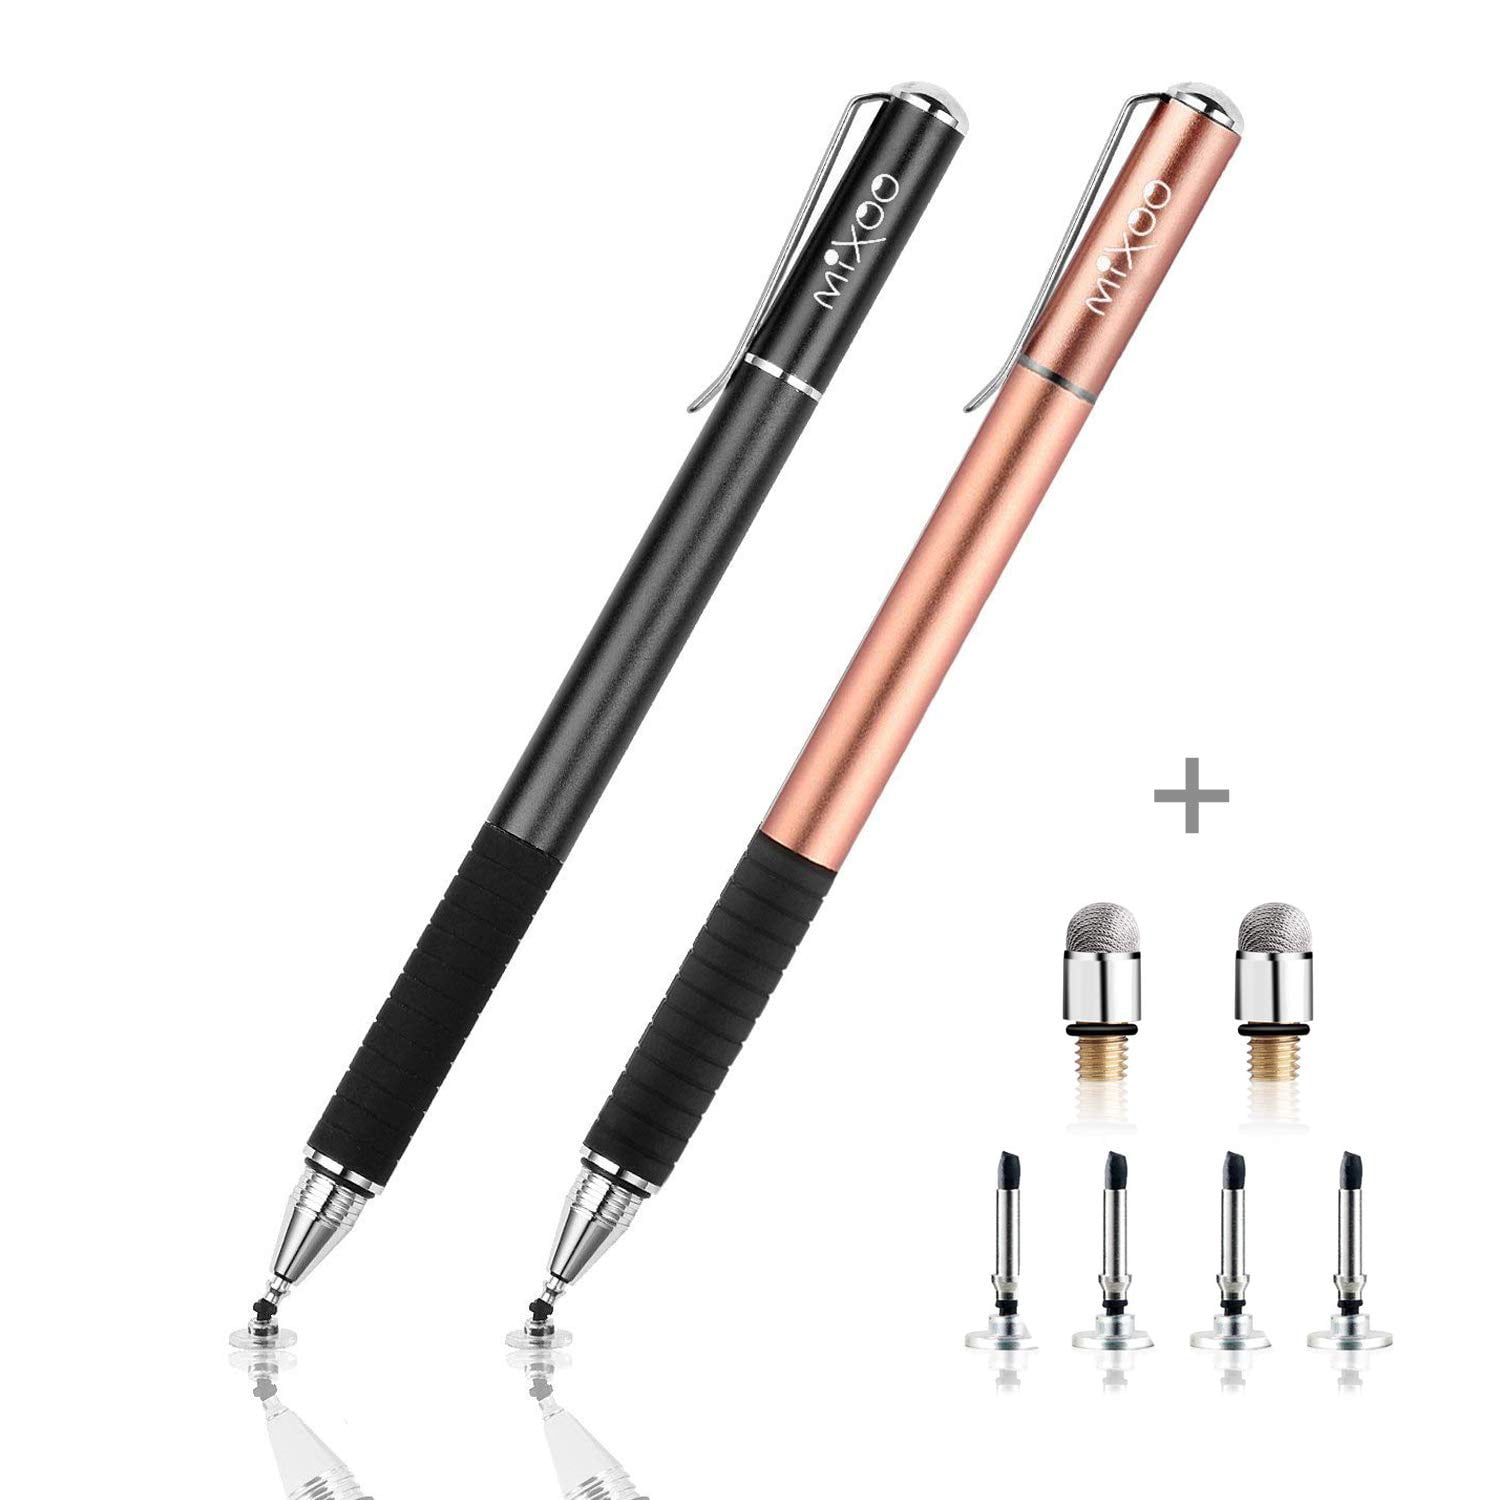 Rose Gold 1 Piece Universal Disc Stylus Compatible with Most Smart Devices Capacitive Stylus Pens for Touch Screens